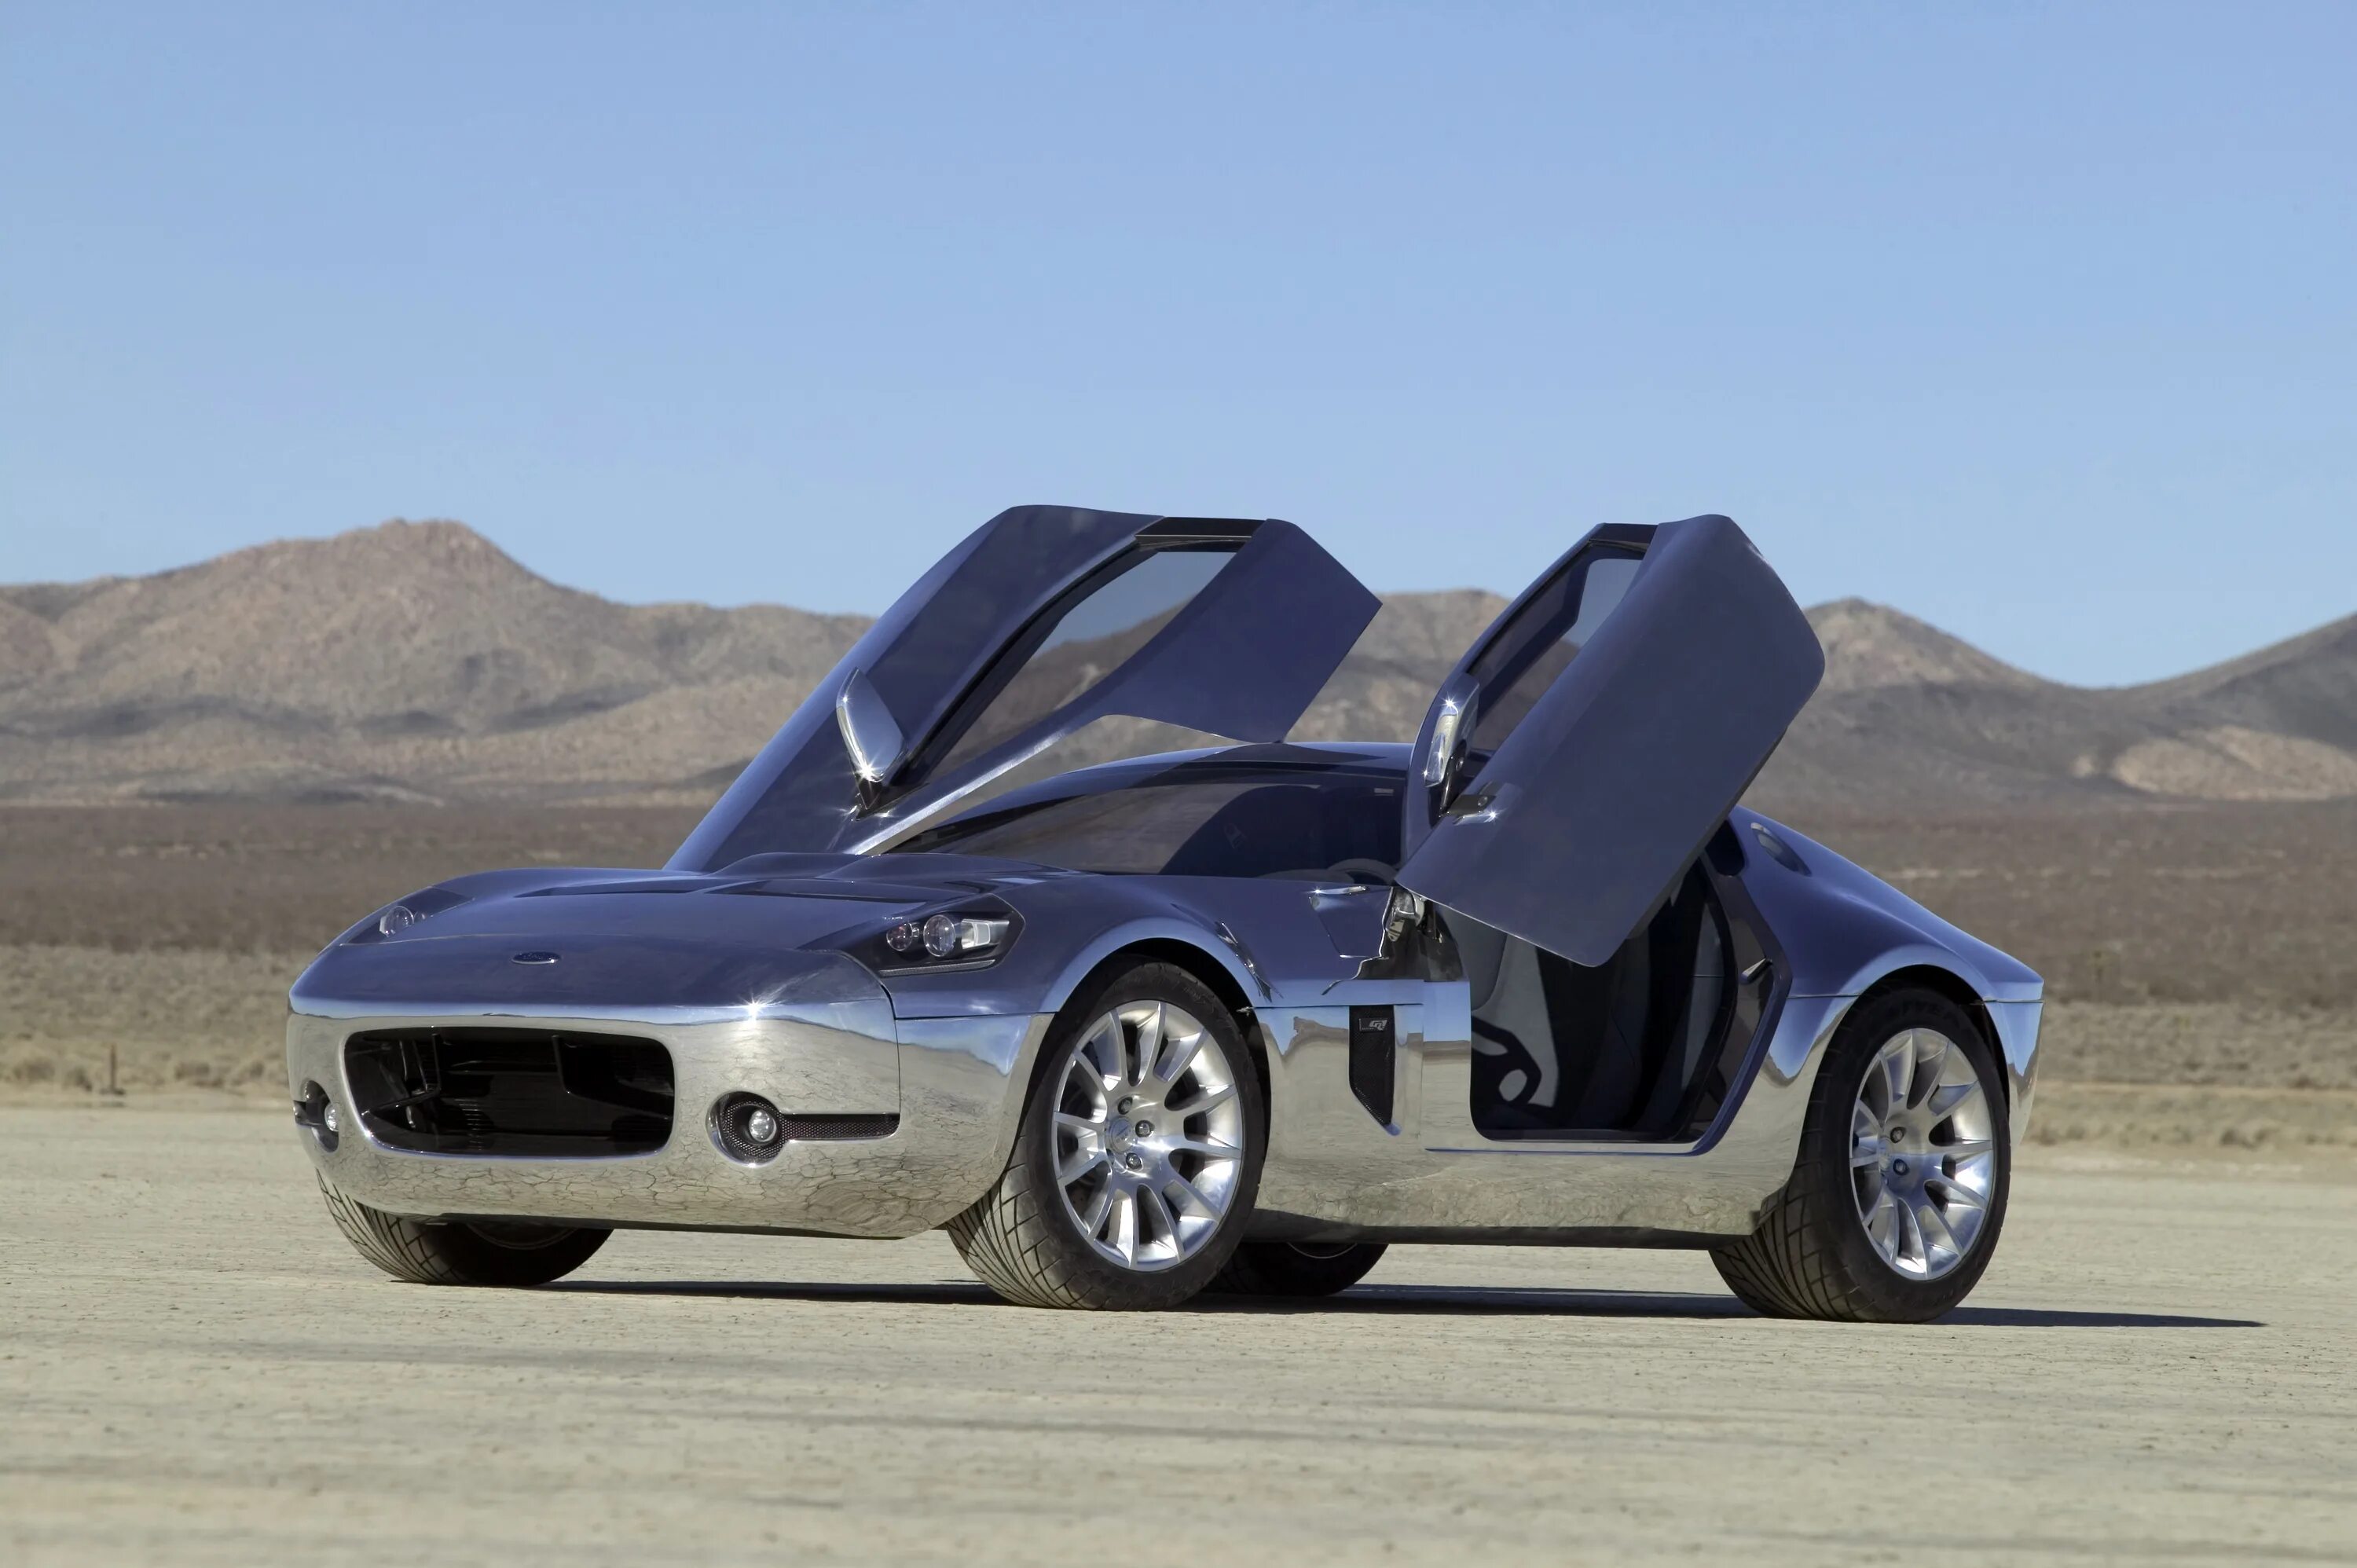 Ford Shelby gr-1. Ford Shelby gr1 Concept. Форд Шелби gr-1 концепт. 2005 Ford Shelby gr-1.